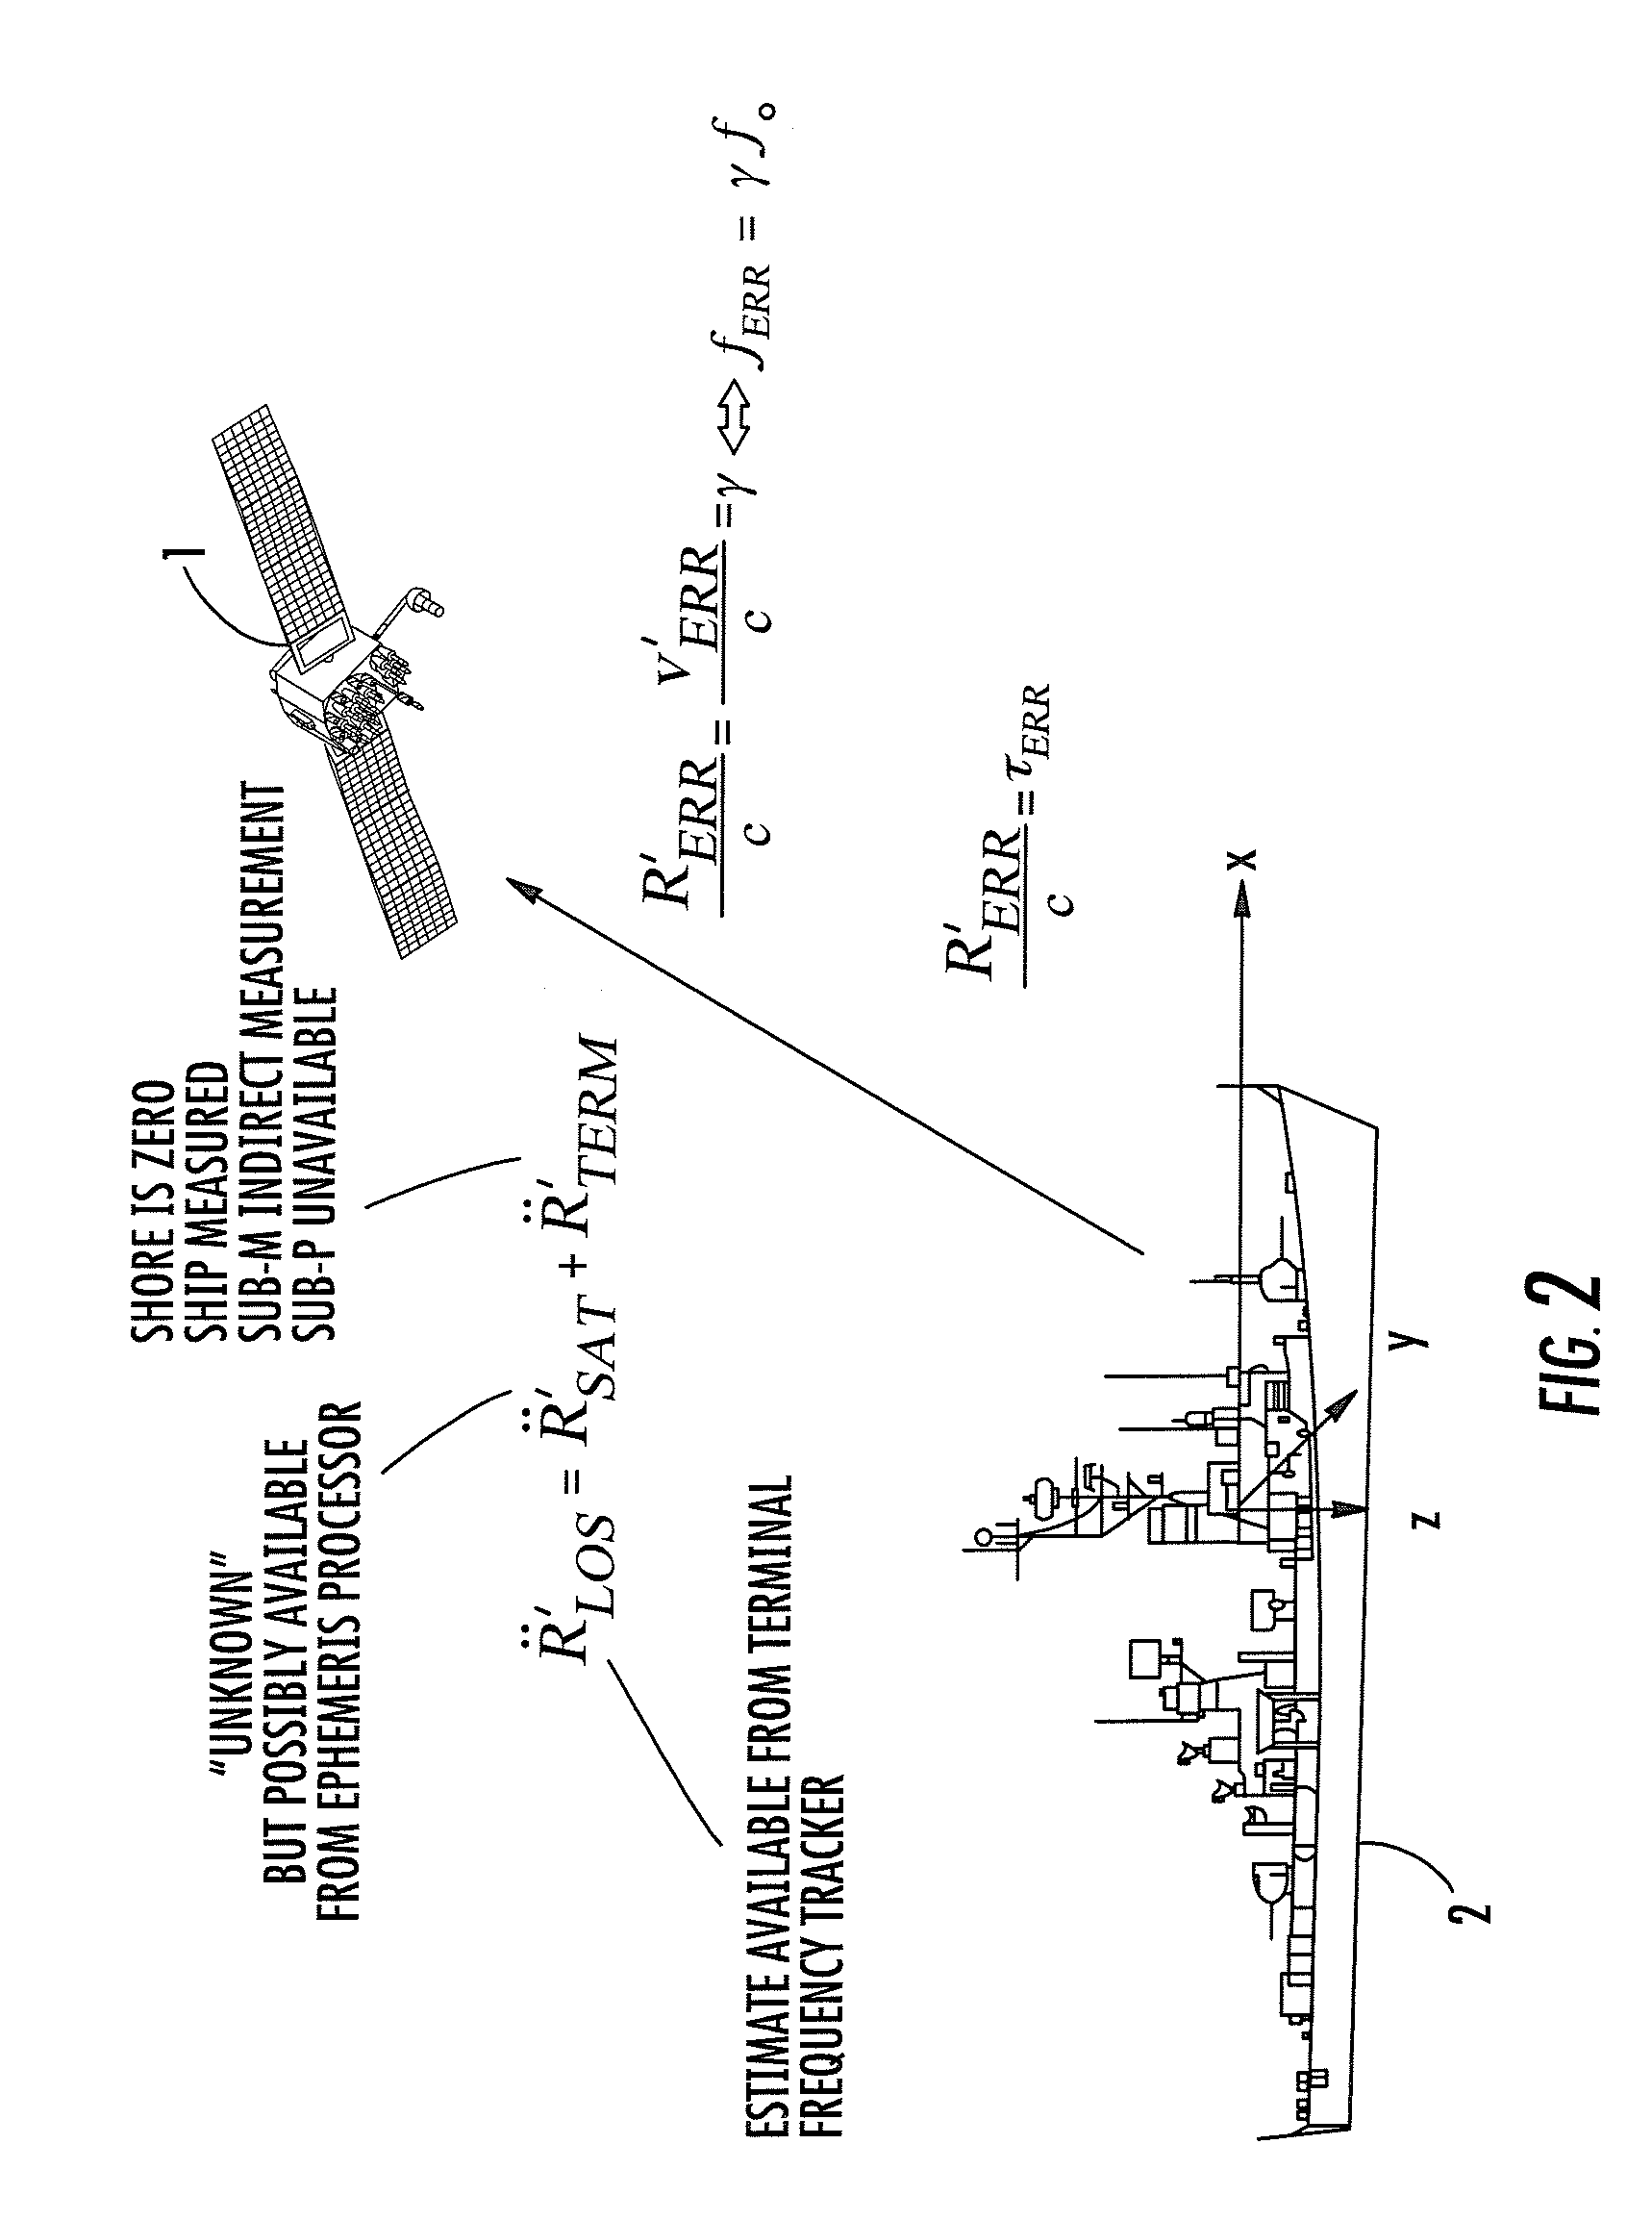 Time/frequency recovery of a communication signal in a multi-beam configuration using a kinematic-based kalman filter and providing a pseudo-ranging feature